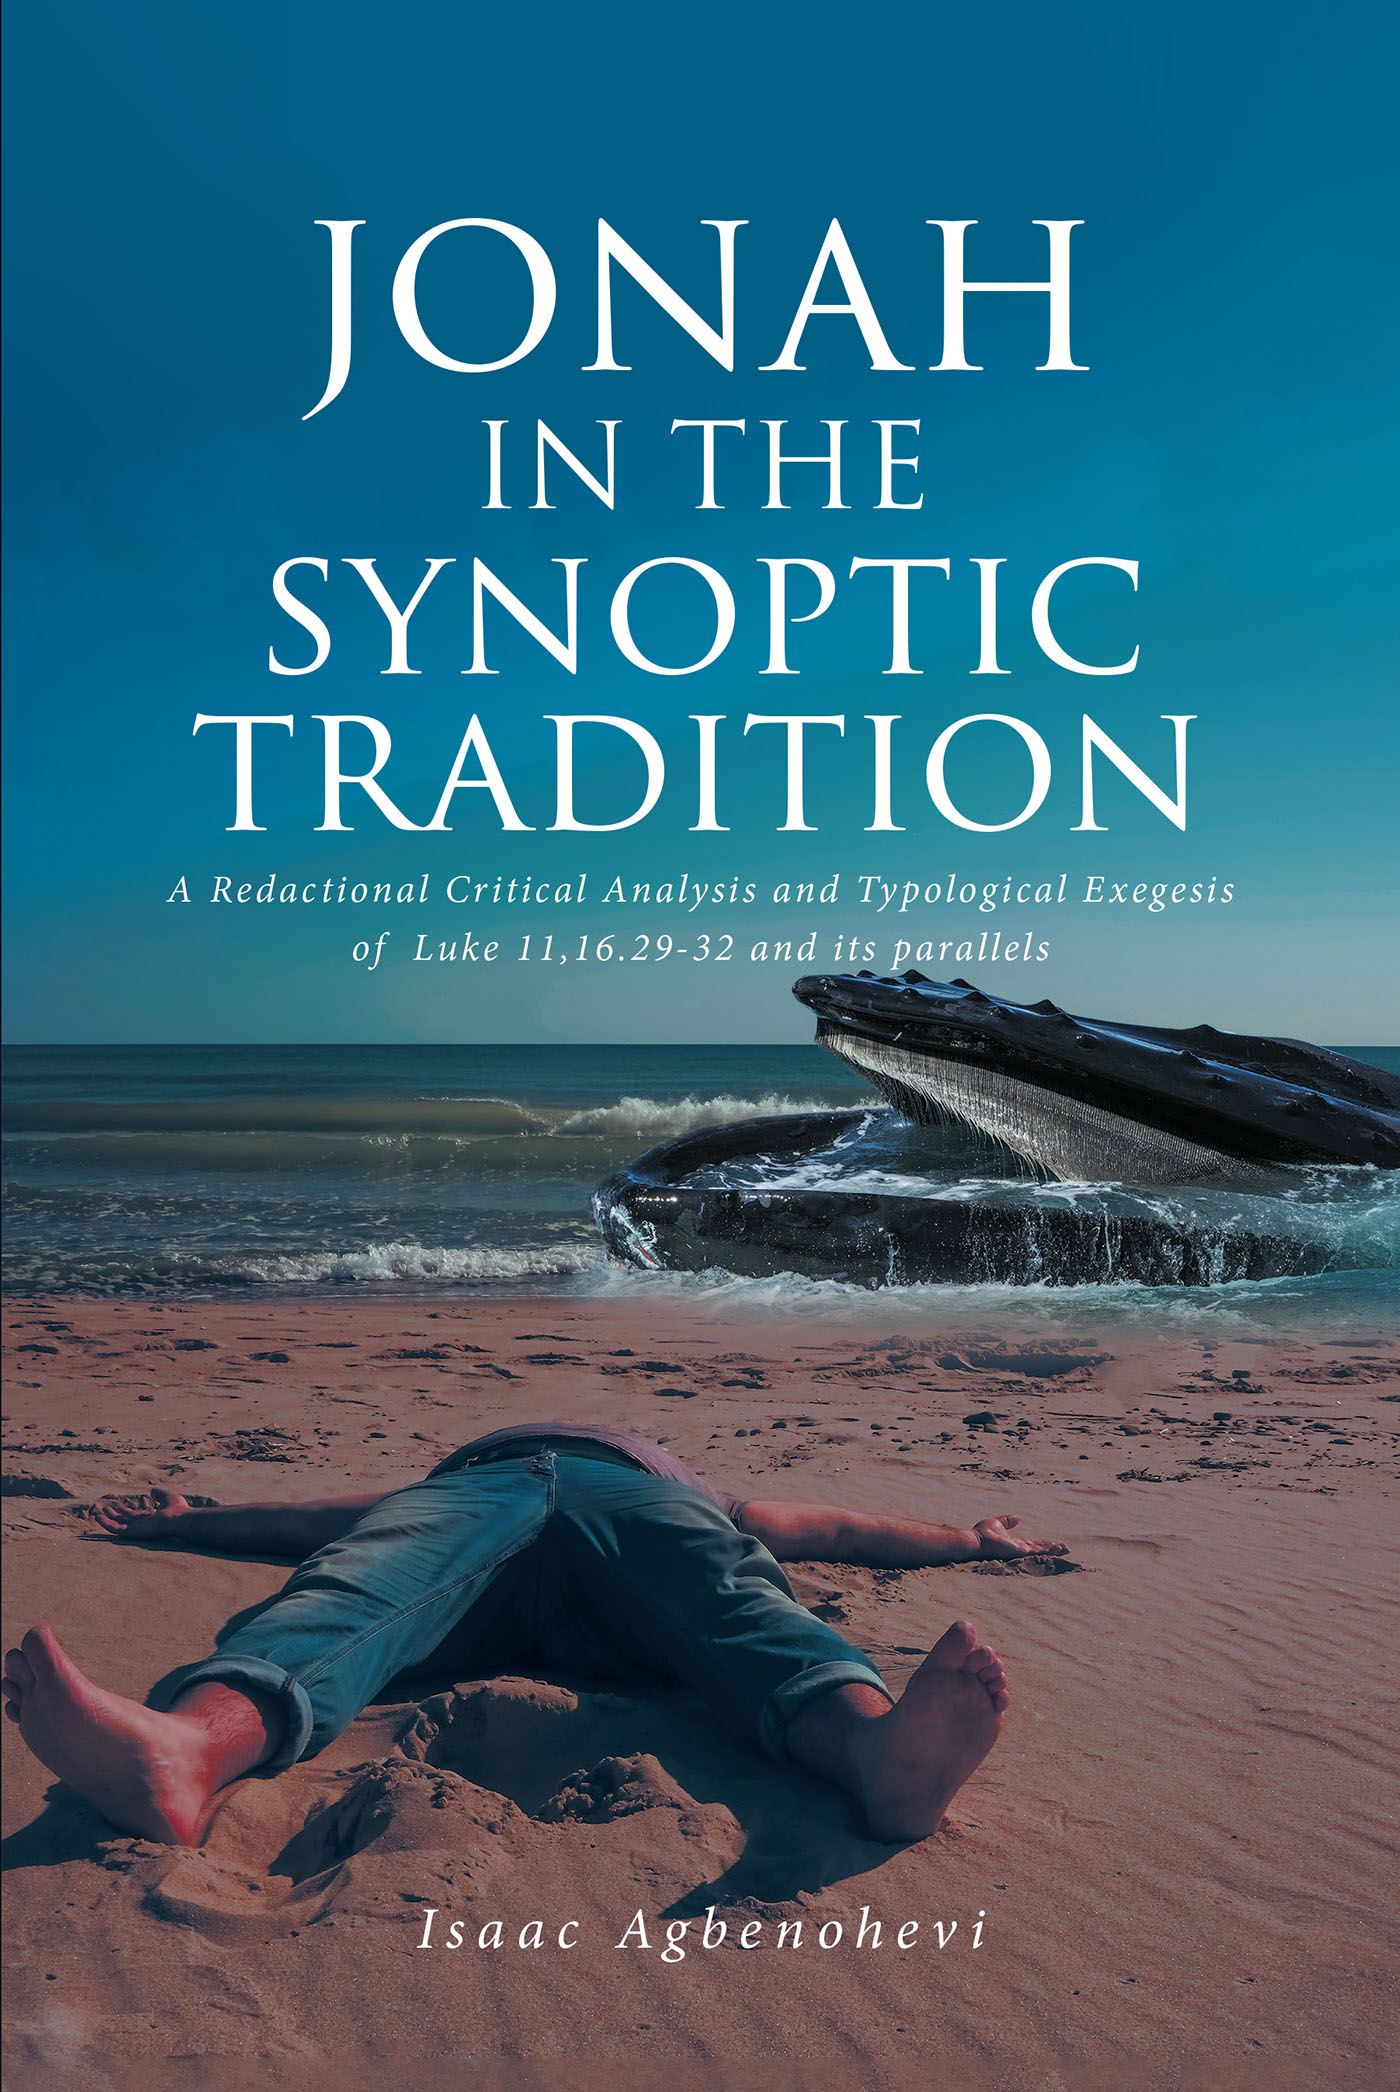 Isaac Agbenohevi’s New Book, "Jonah in the Synoptic Tradition," a Scholarly Critical Analysis of the Sign of Jonah That Examines Both Its Biblical and Historical Contexts